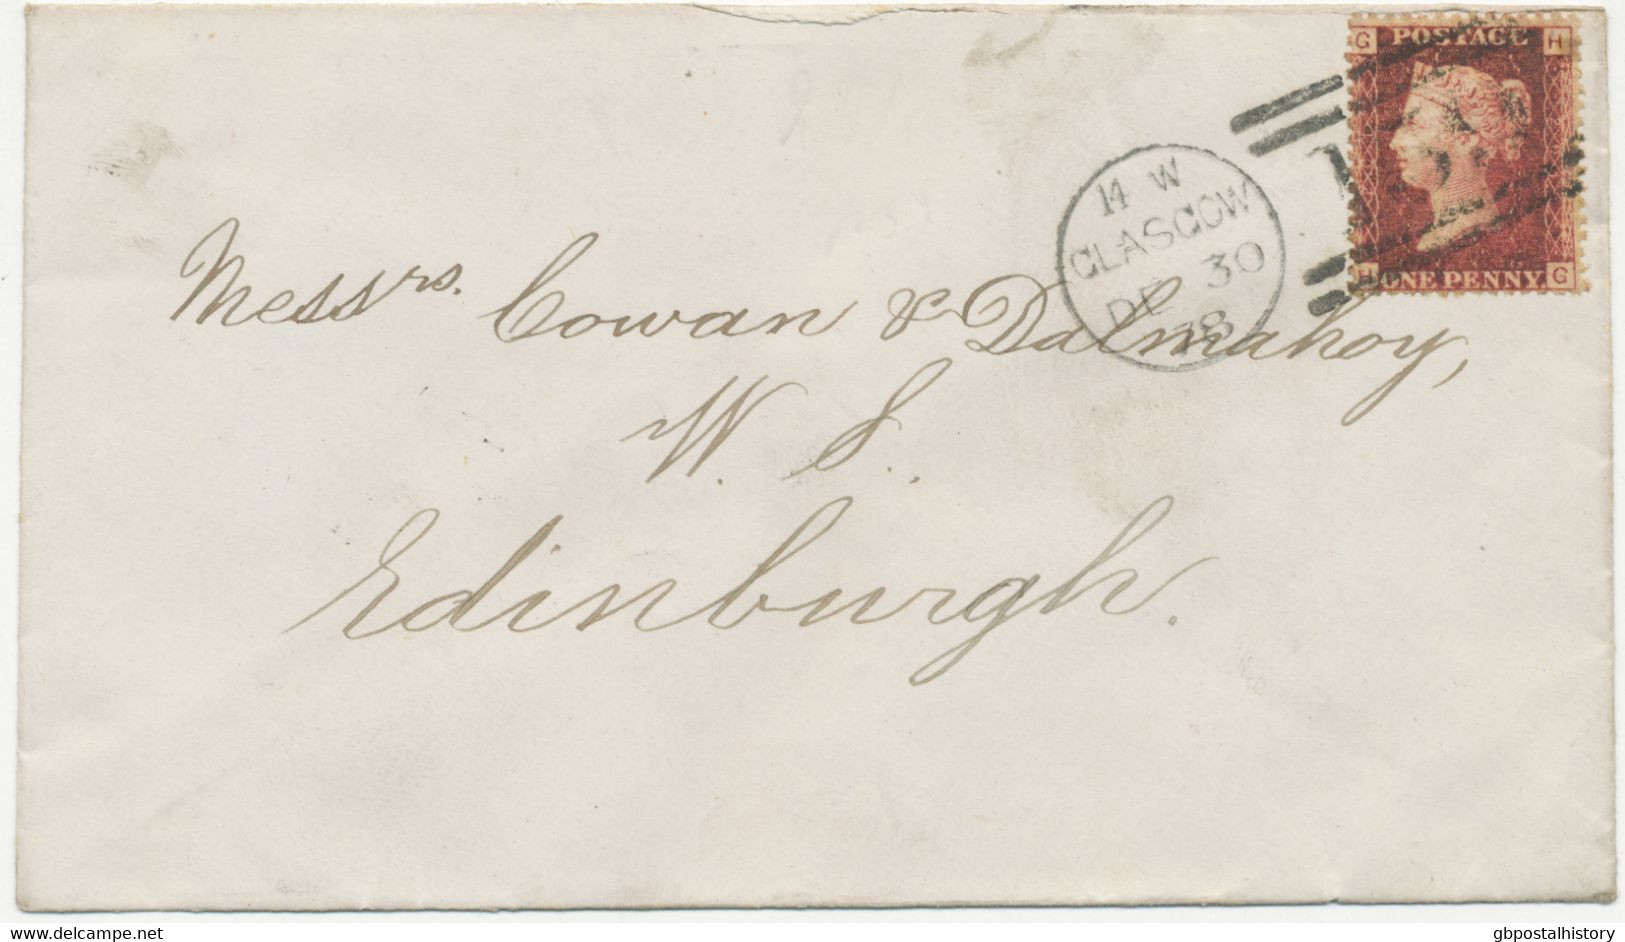 GB „159 / GLASGOW“ Scottish Duplex On Superb Cover With QV 1d Red Plate 201 (HG) - Briefe U. Dokumente